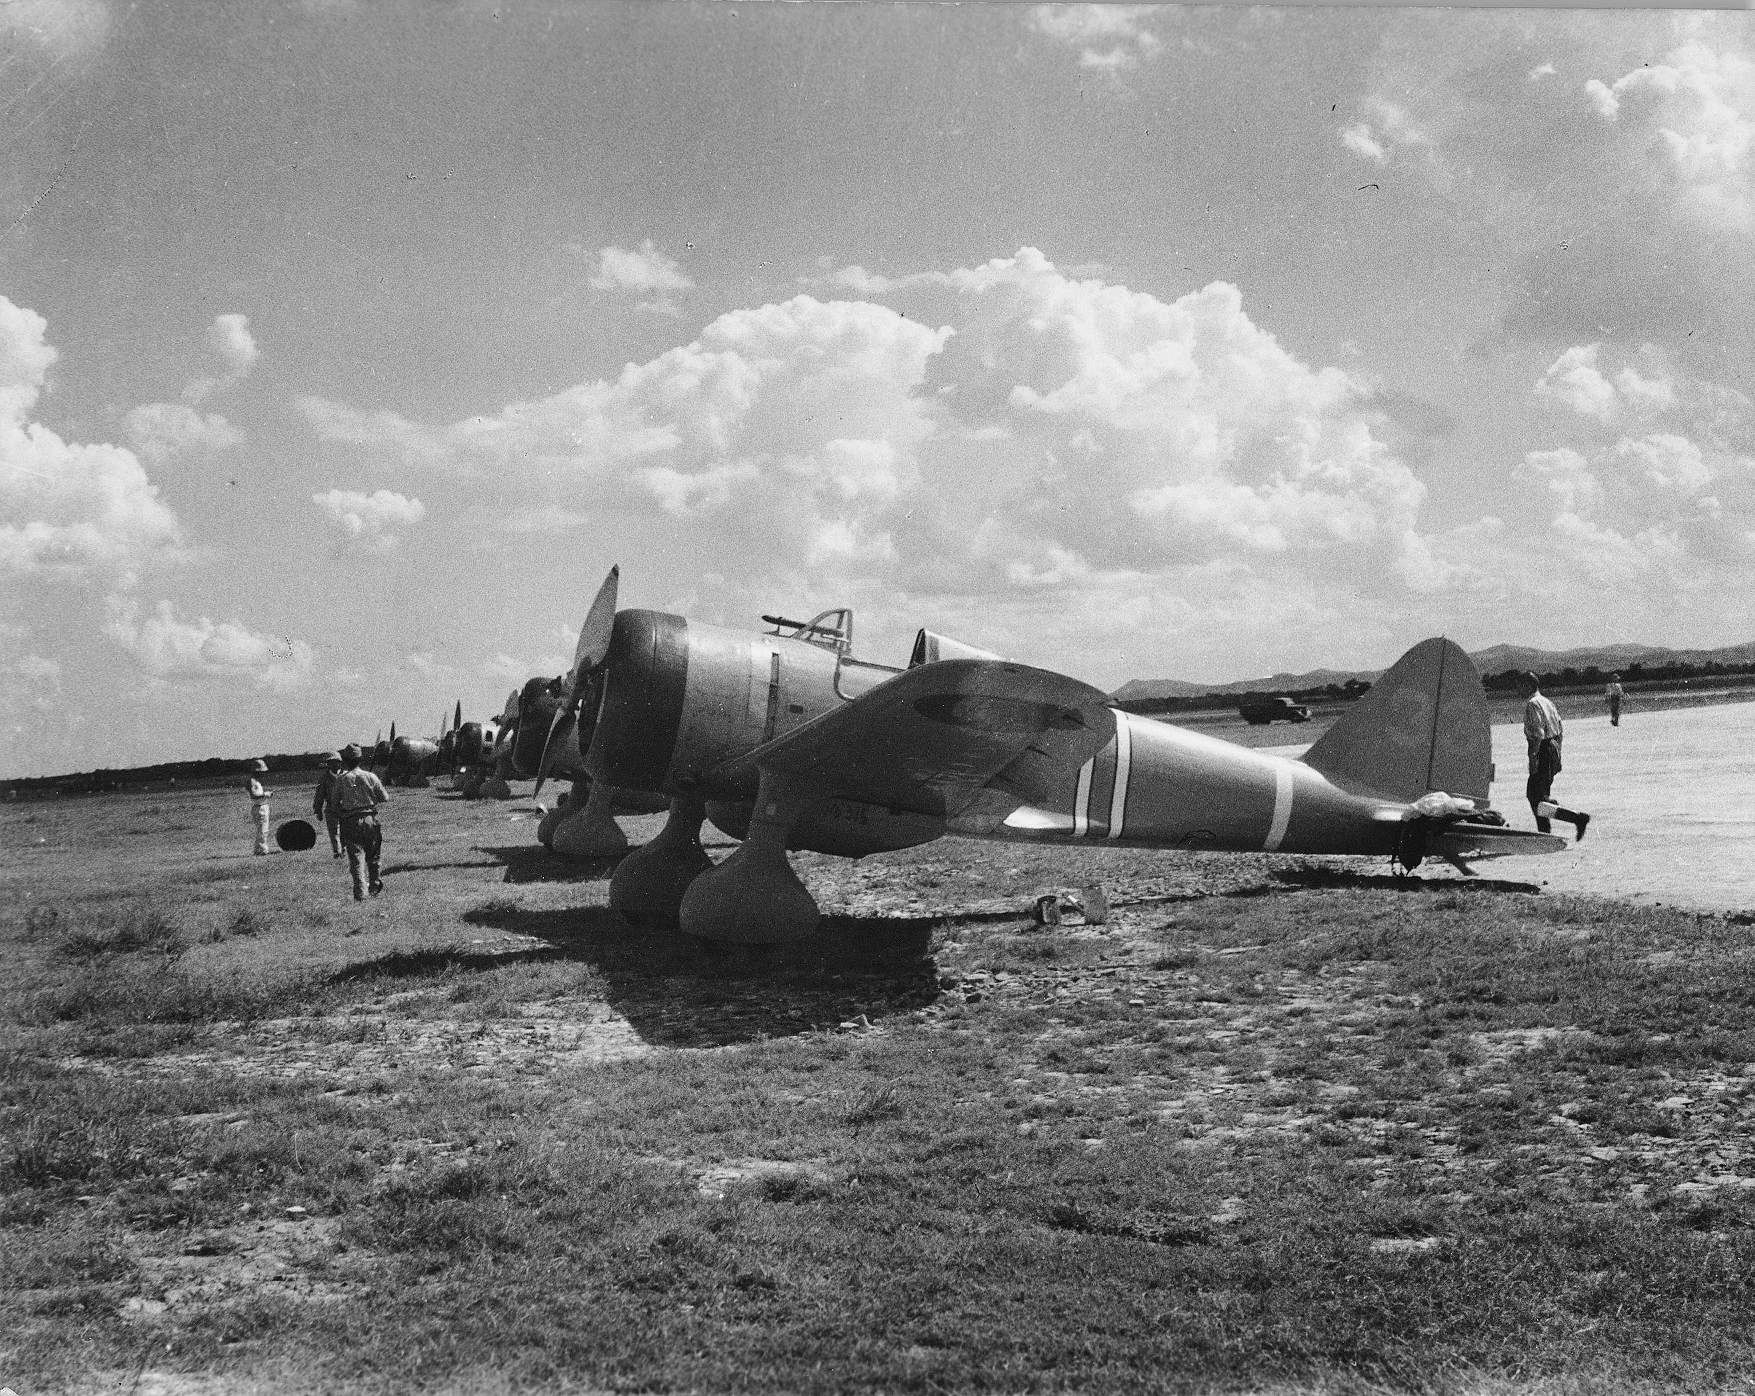 These antiquated Japanese Nakajima Ki-27 fighter planes were photographed at an airfield in Kwangtung, China, in 1938. By the 1940s, a few of these aircraft were still in service. Note the fixed landing gear.